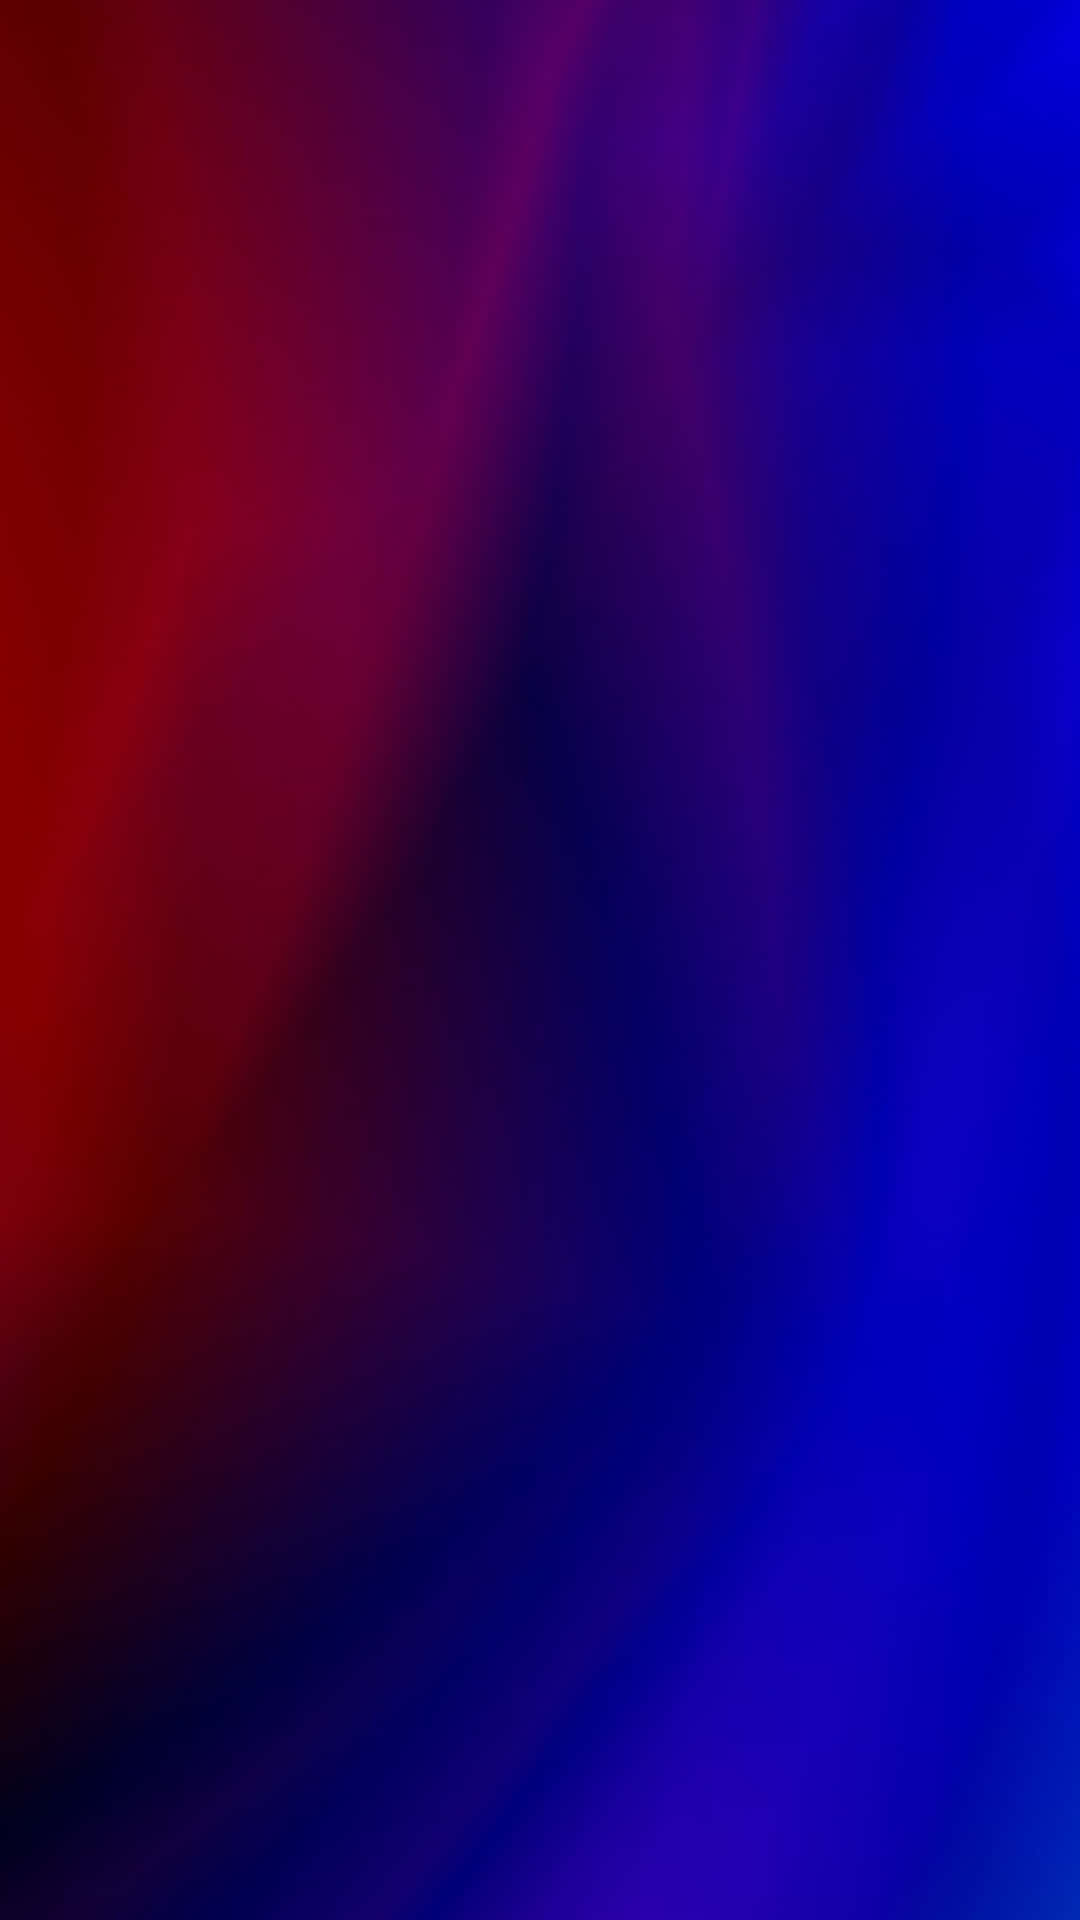 The latest- The Trendy Gradient Iphone Wallpaper